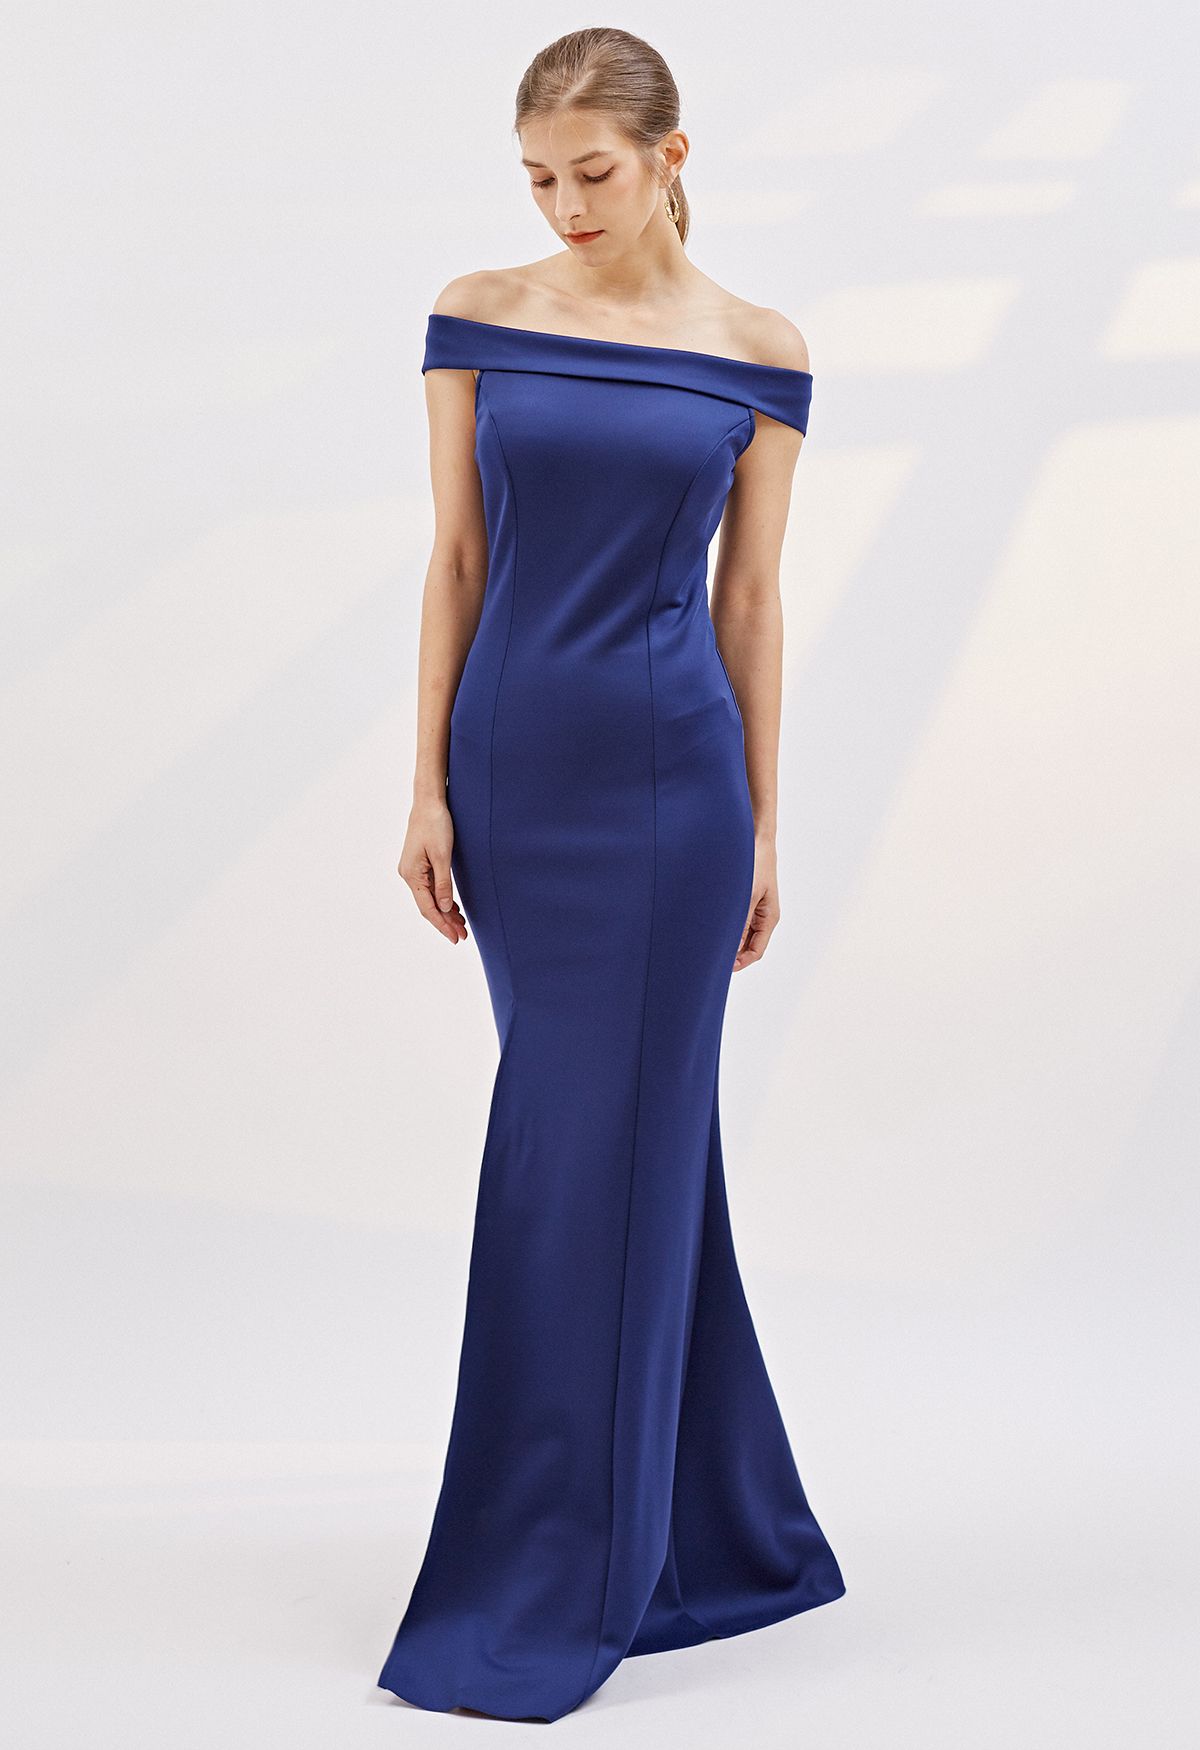 Folded Off-Shoulder Slit Mermaid Gown in Navy - Retro, Indie and Unique ...